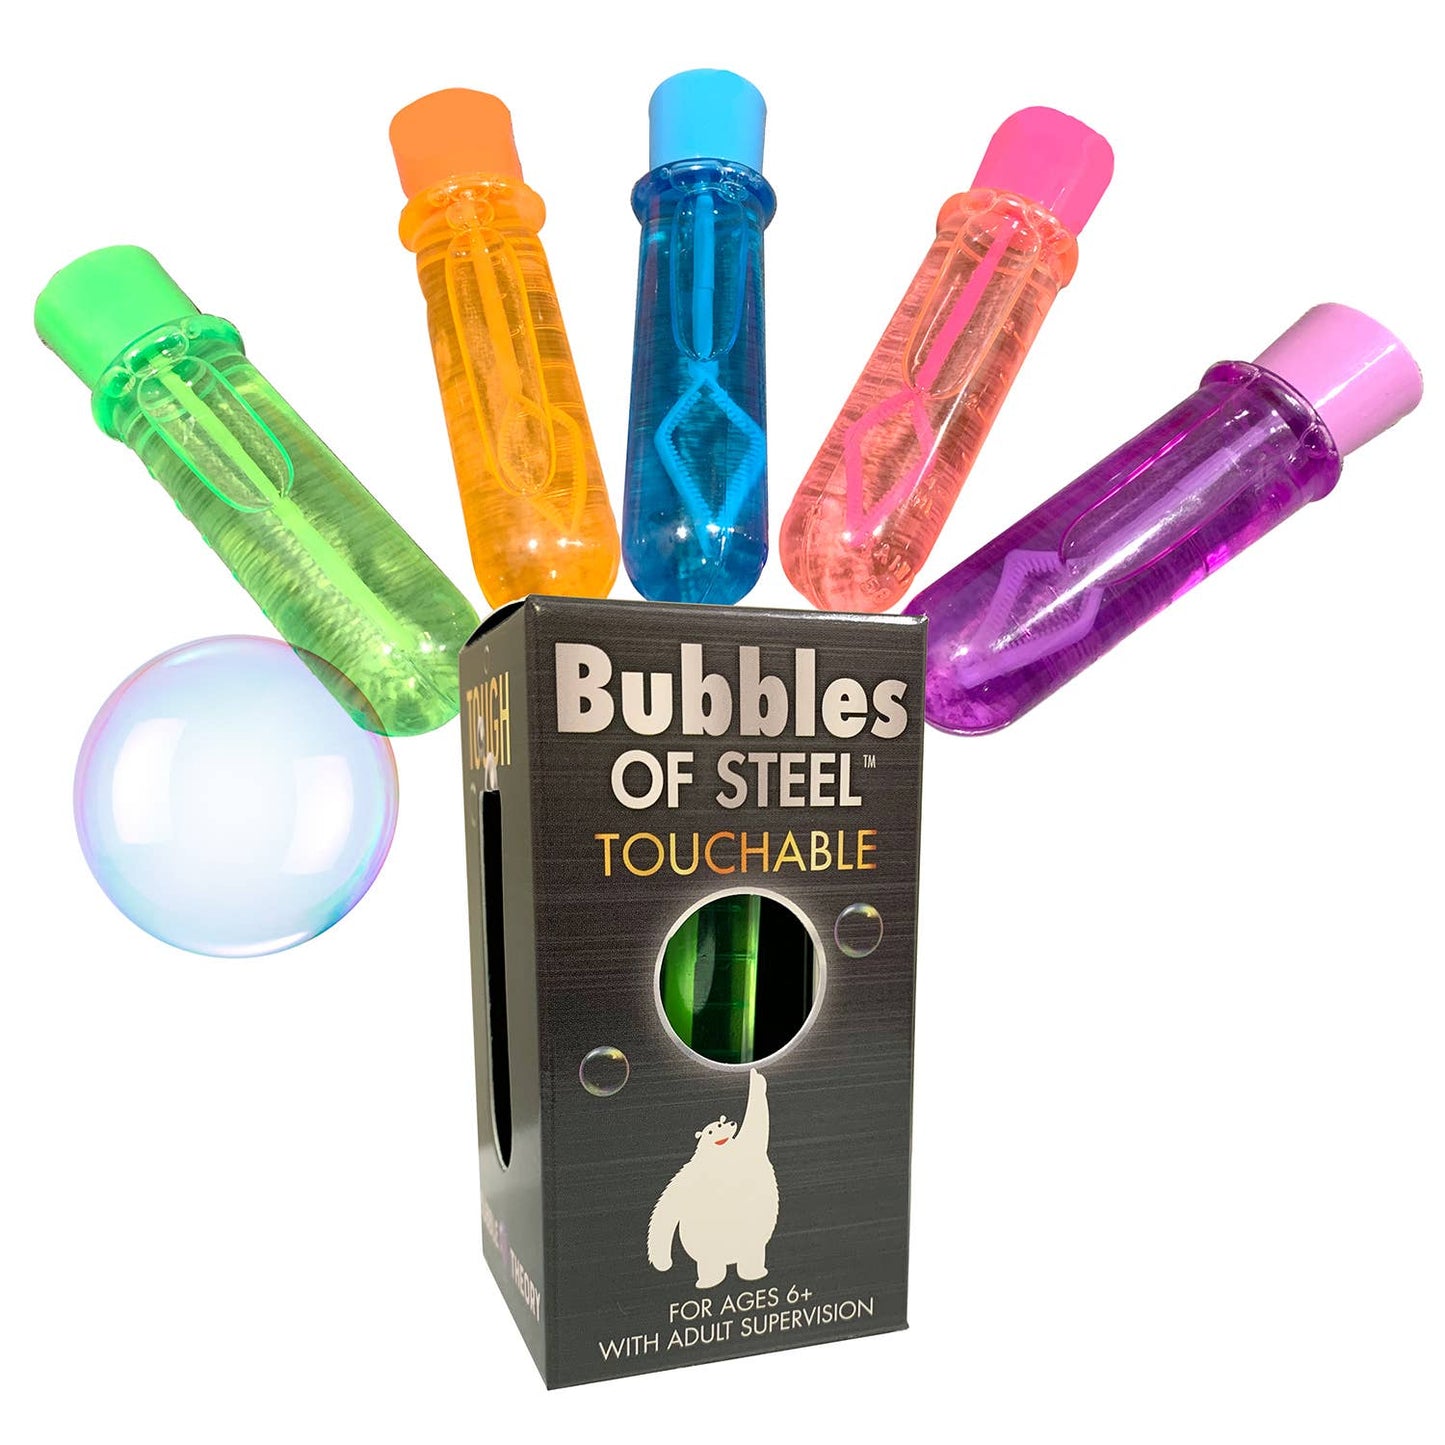 Copernicus Toys - Bubbles of Steel: Touchable and Heroic bubbles